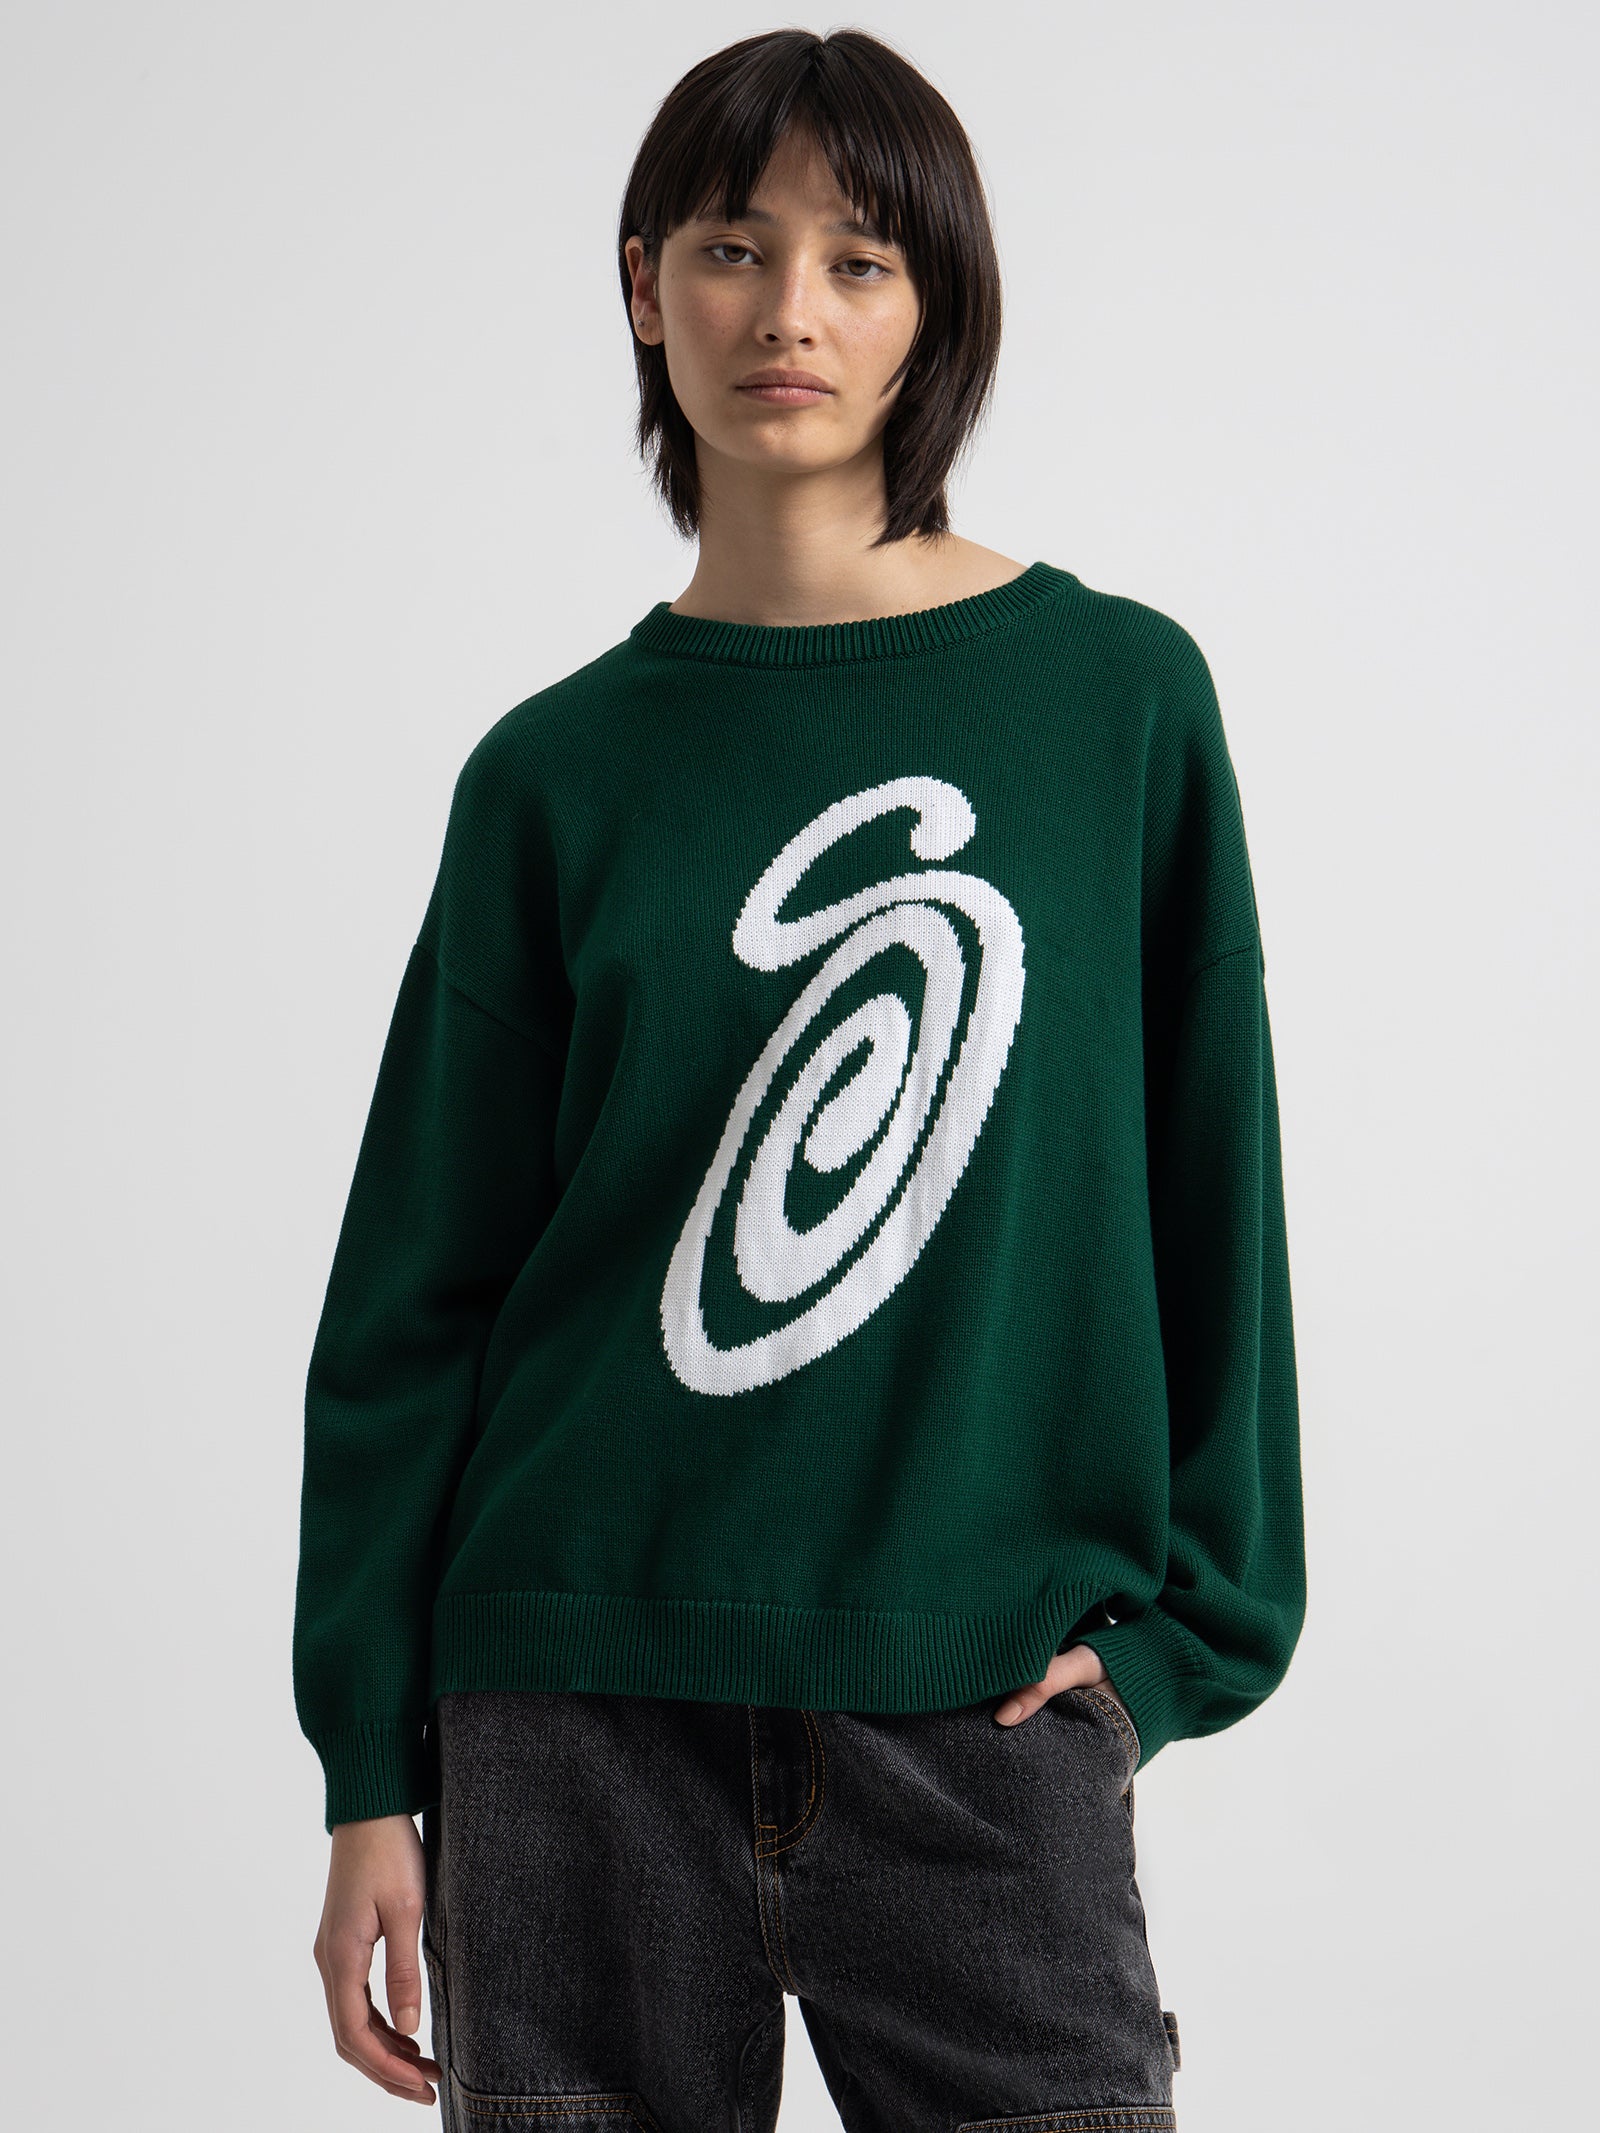 stussy curly s sweater 22AW L即日発送対応致します